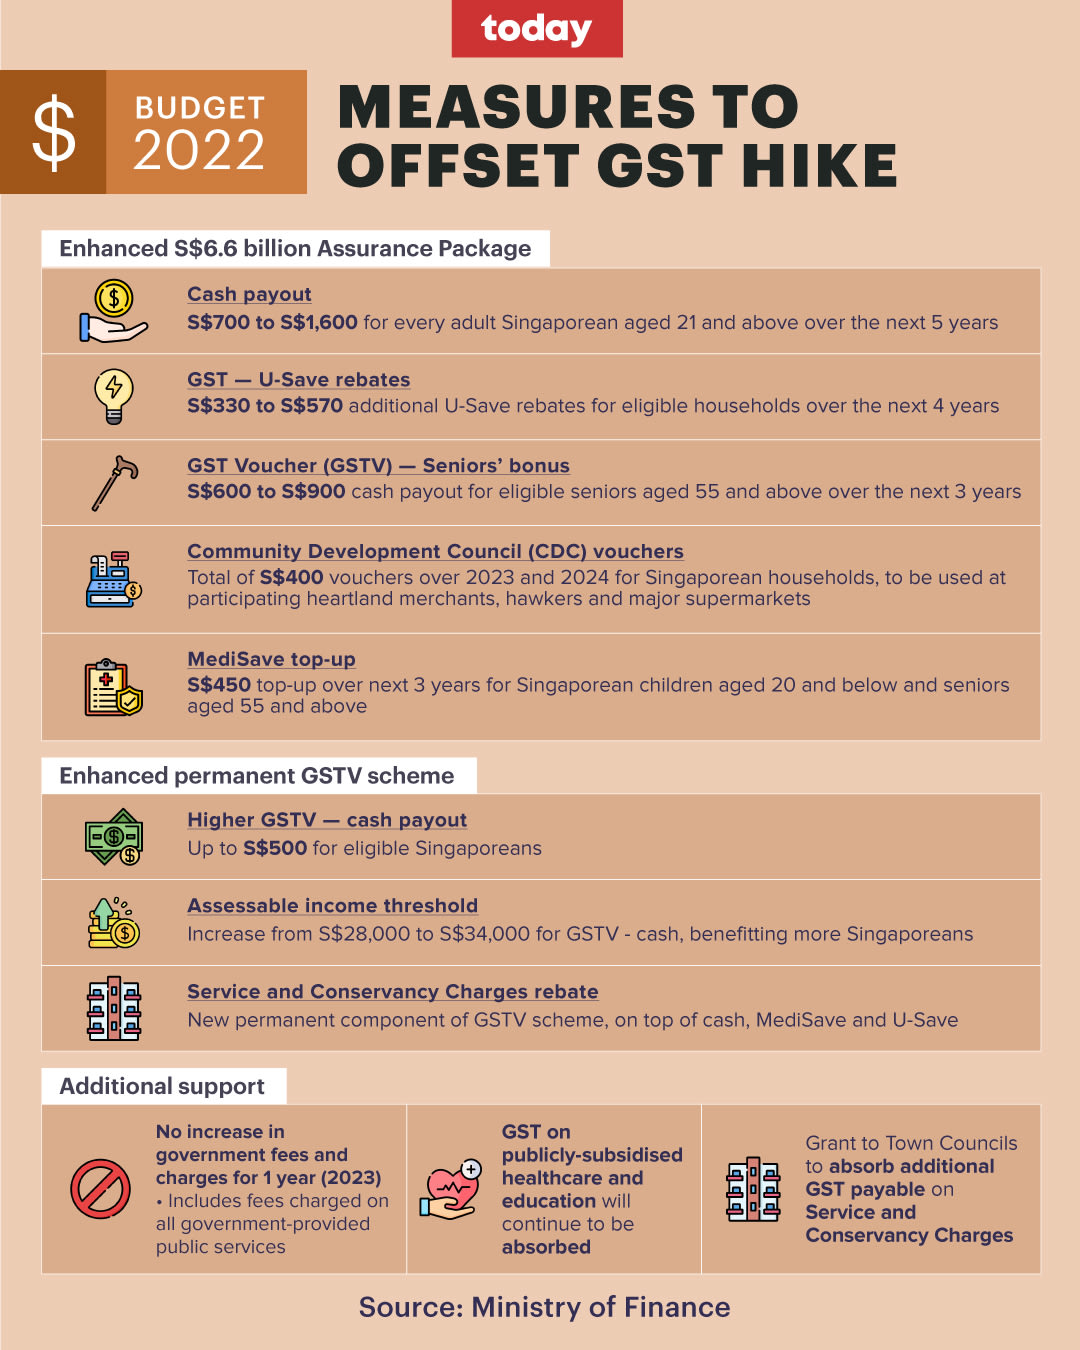 budget-2022-gst-increase-to-be-staggered-over-2-years-starting-from-jan-2023-today